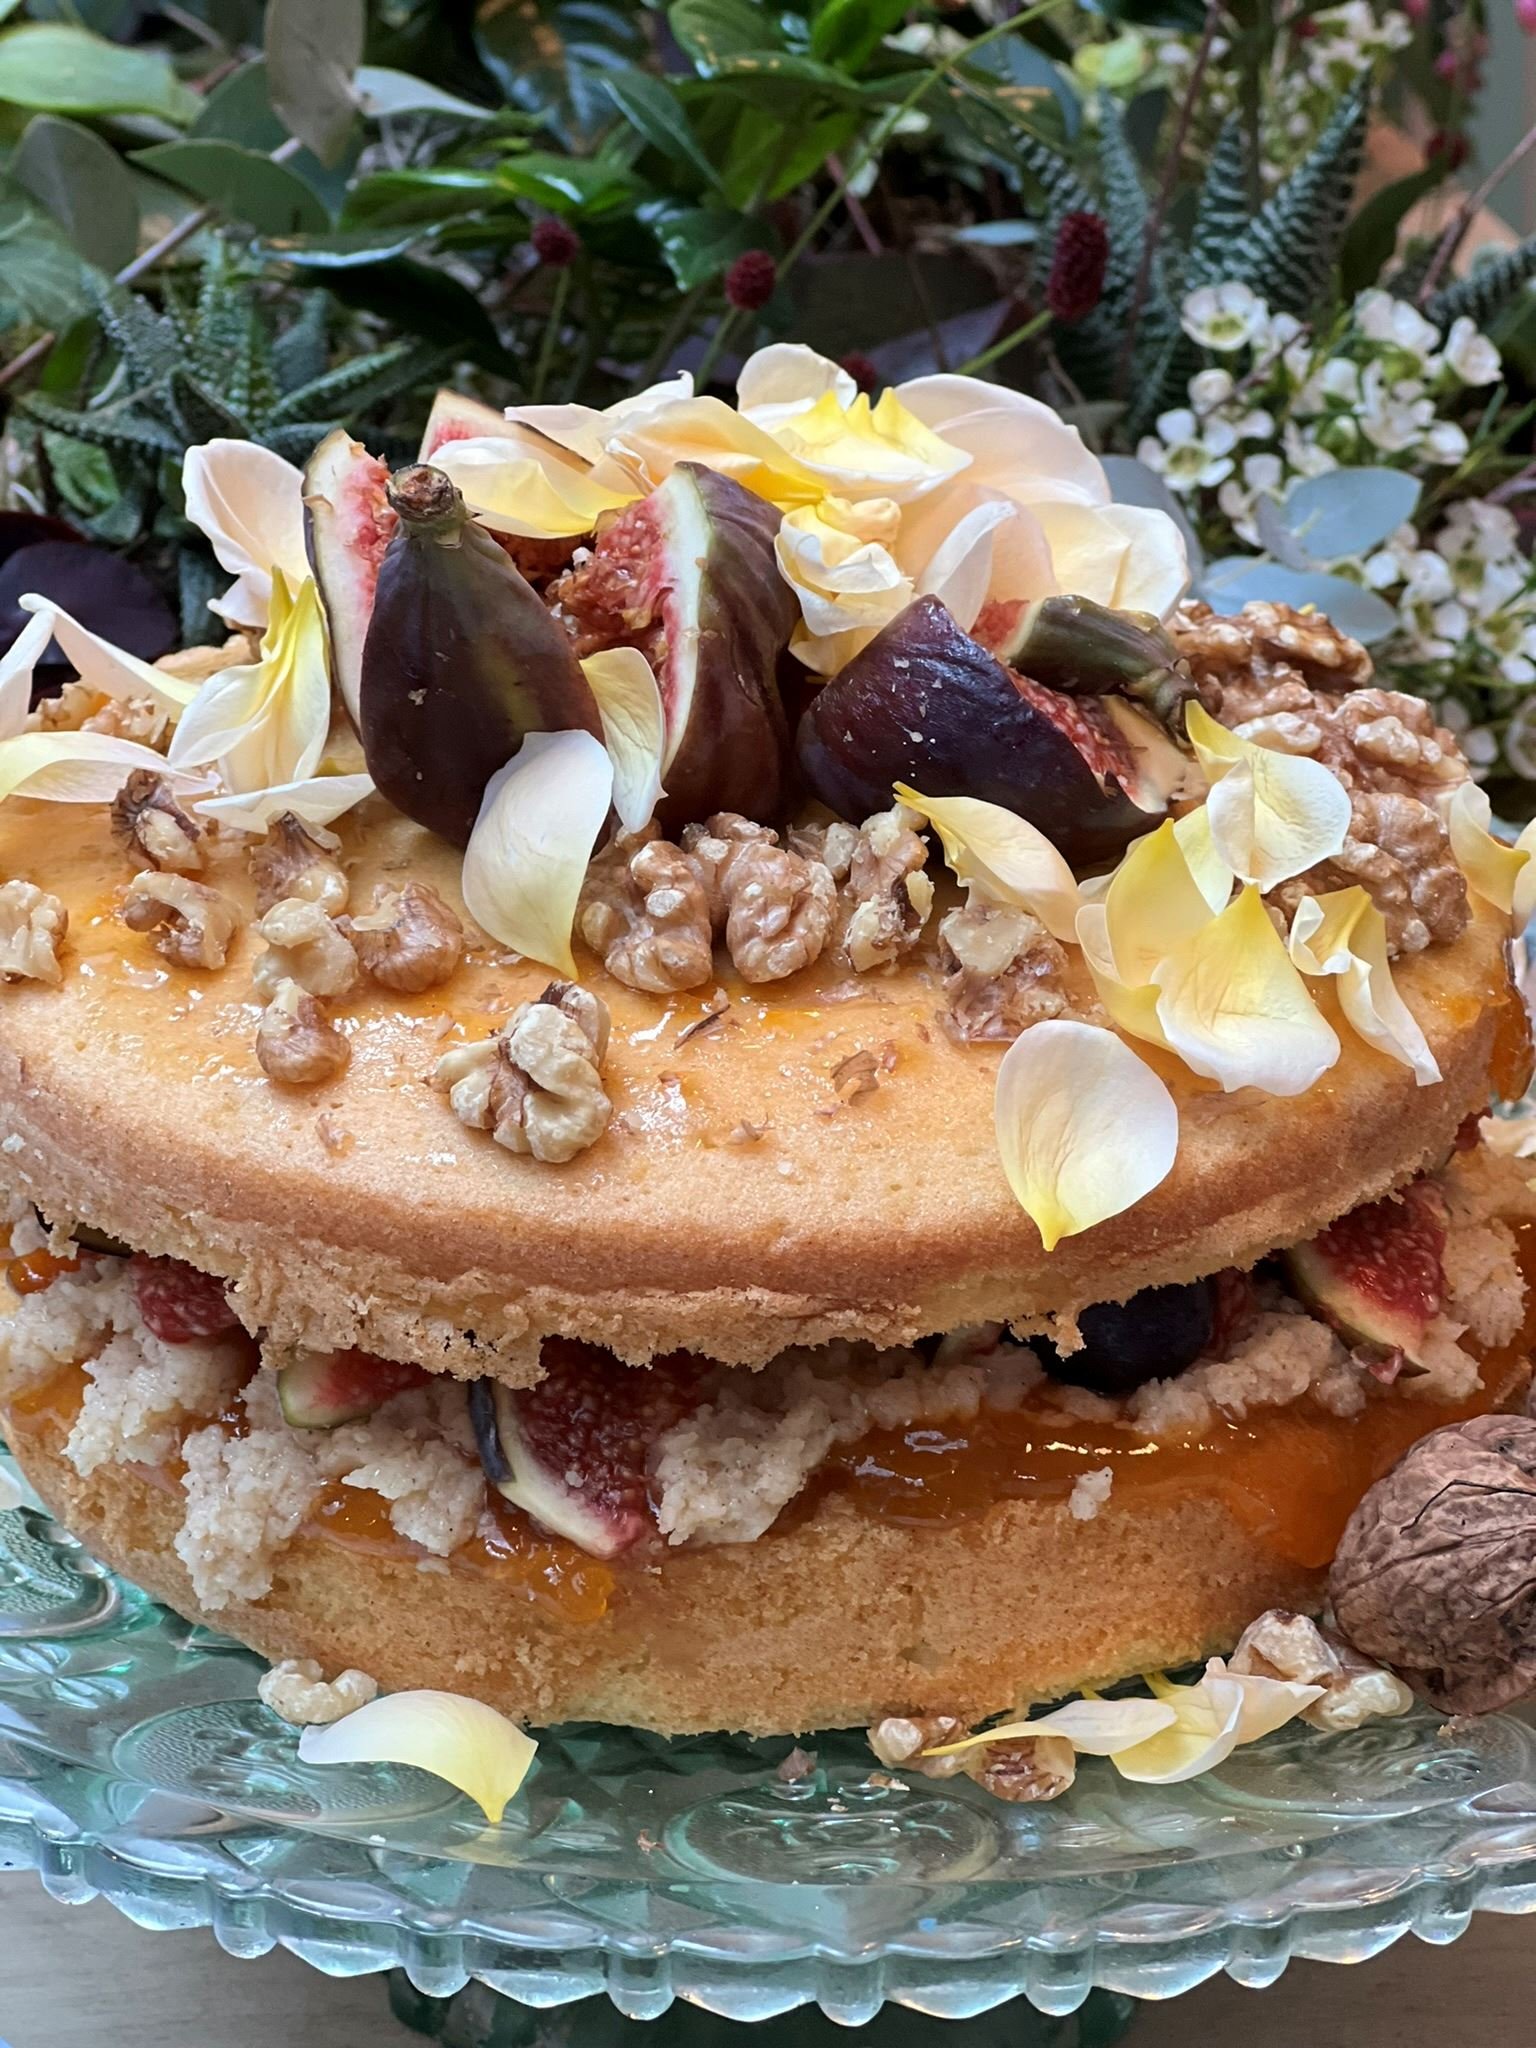 Autumnal cake decorated with figs and rose petals